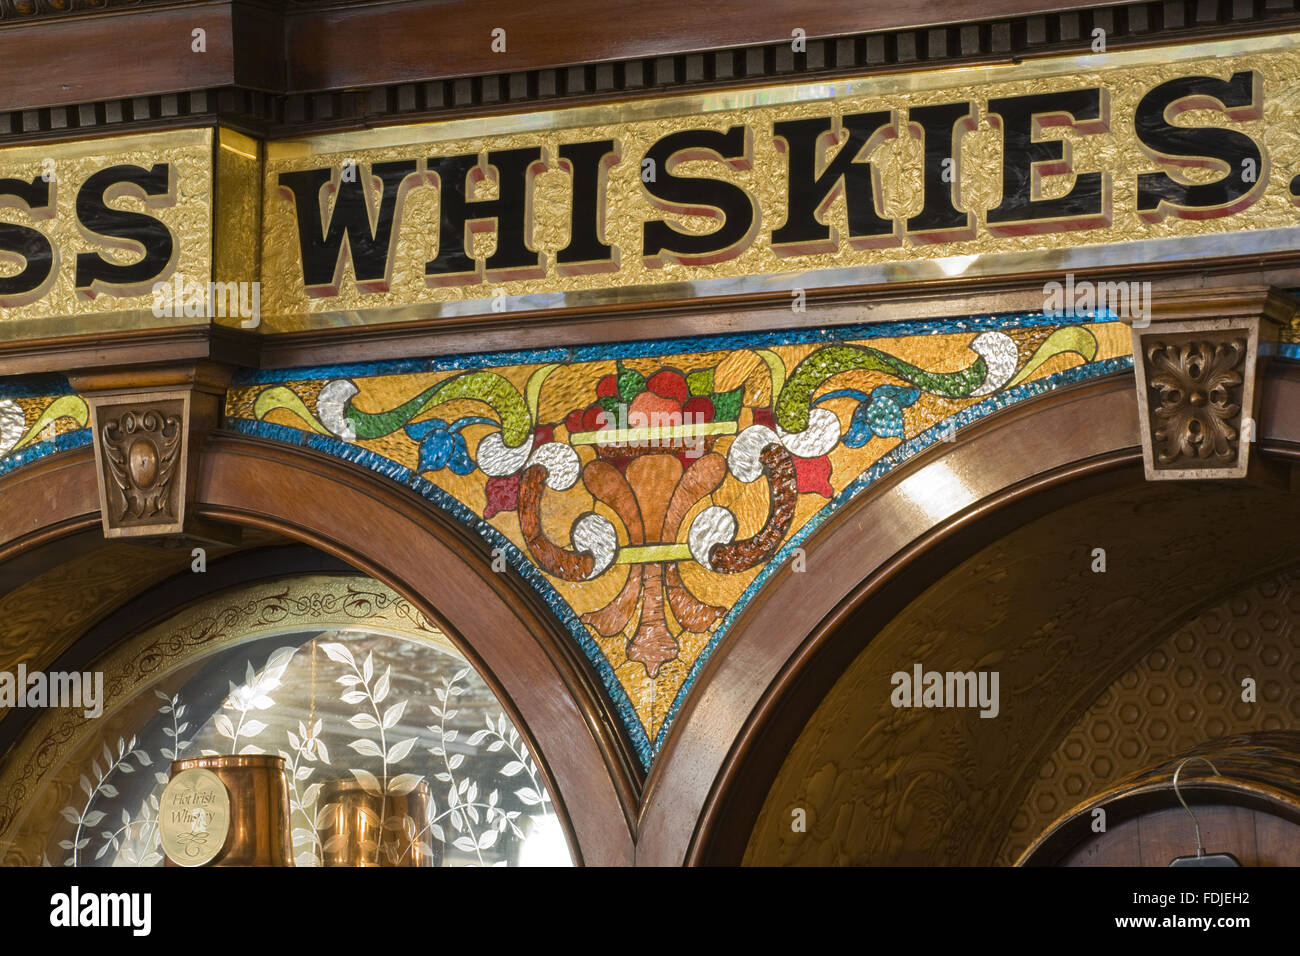 Decoration above the bar at The Crown Bar, Great Victoria Street, Belfast. Formerly known as the Crown Liquor Saloon, the pub building dates from 1826 but the wonderful late Victorian craftsmanship of the tiling, glass and woodwork undertaken by Italian w Stock Photo